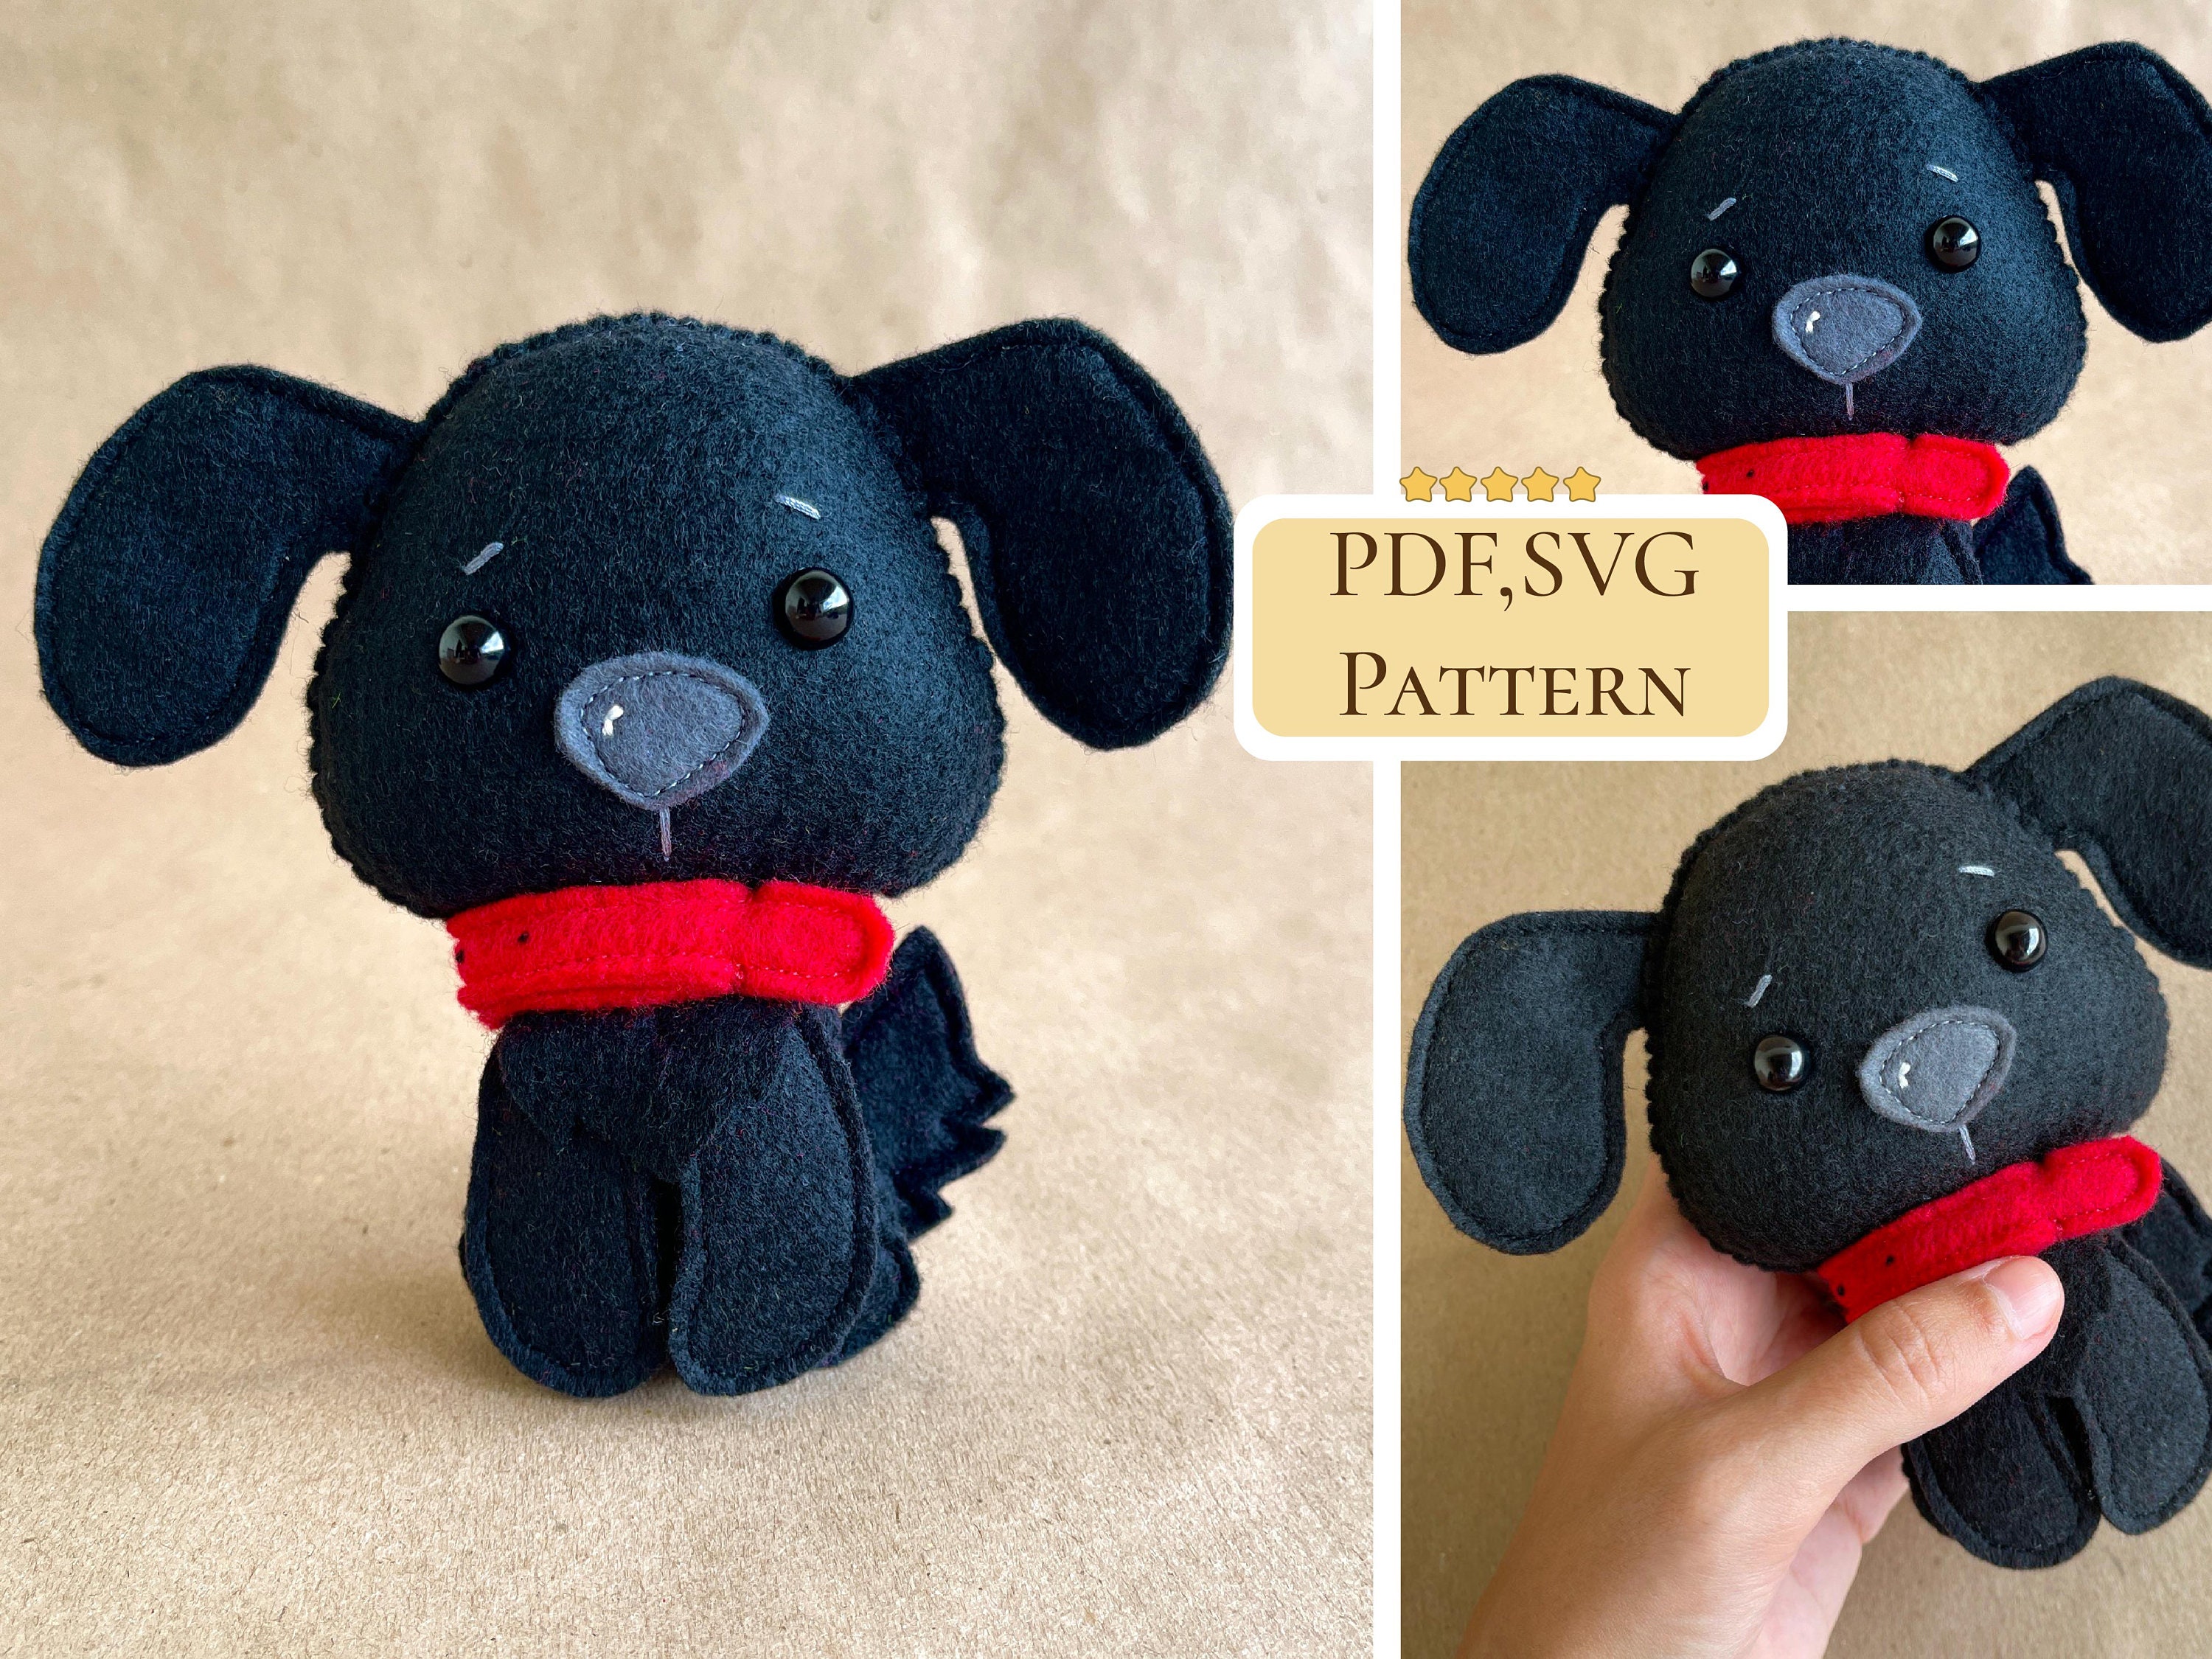 200+ Fun and Easy hand sewing projects for kids - Sew a Softie